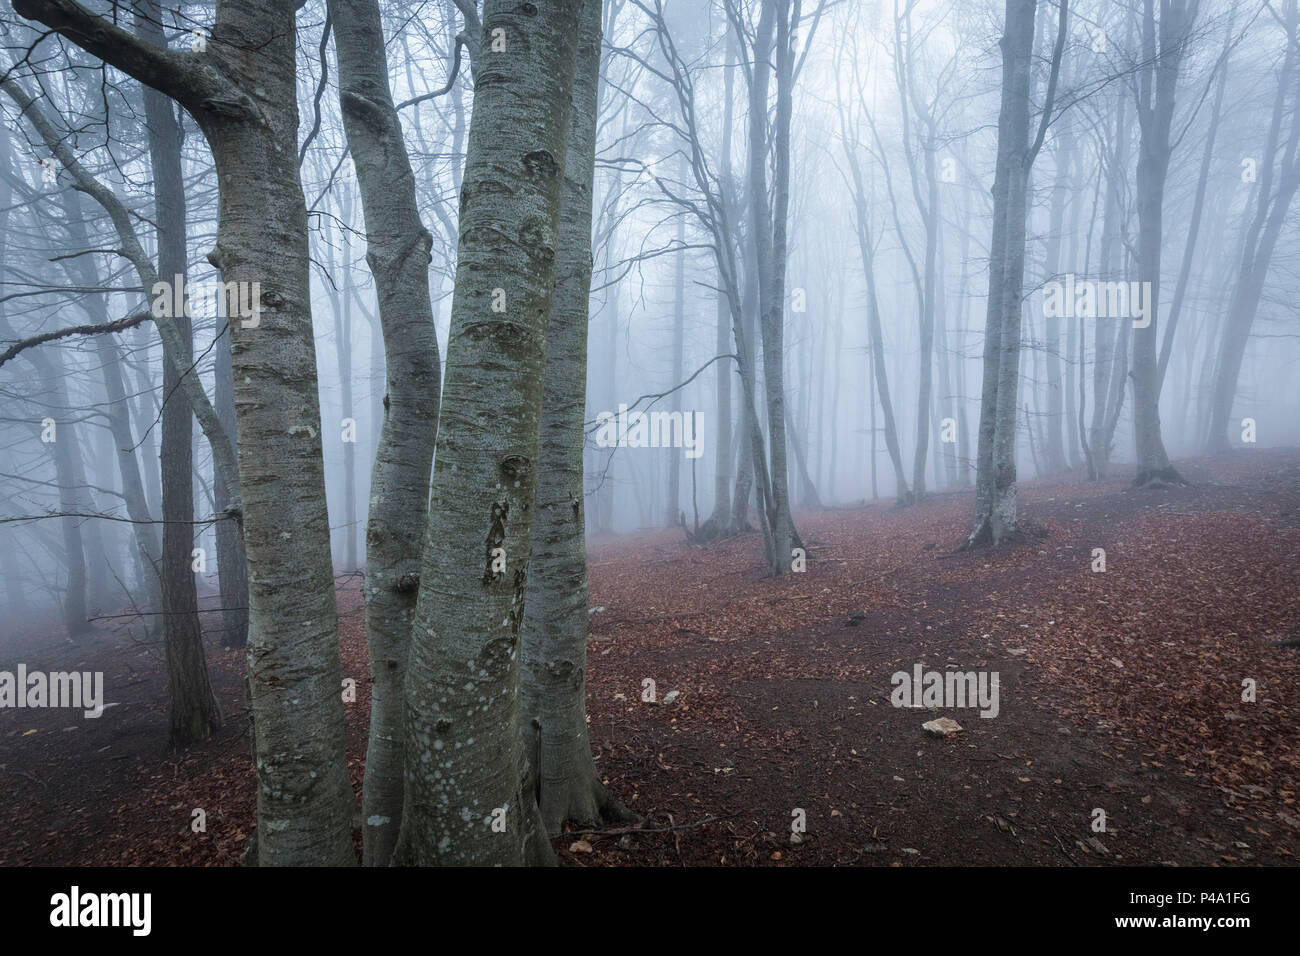 Trees in the mist, Parco della Grigna, province of Lecco, Lombardy, Italy Stock Photo